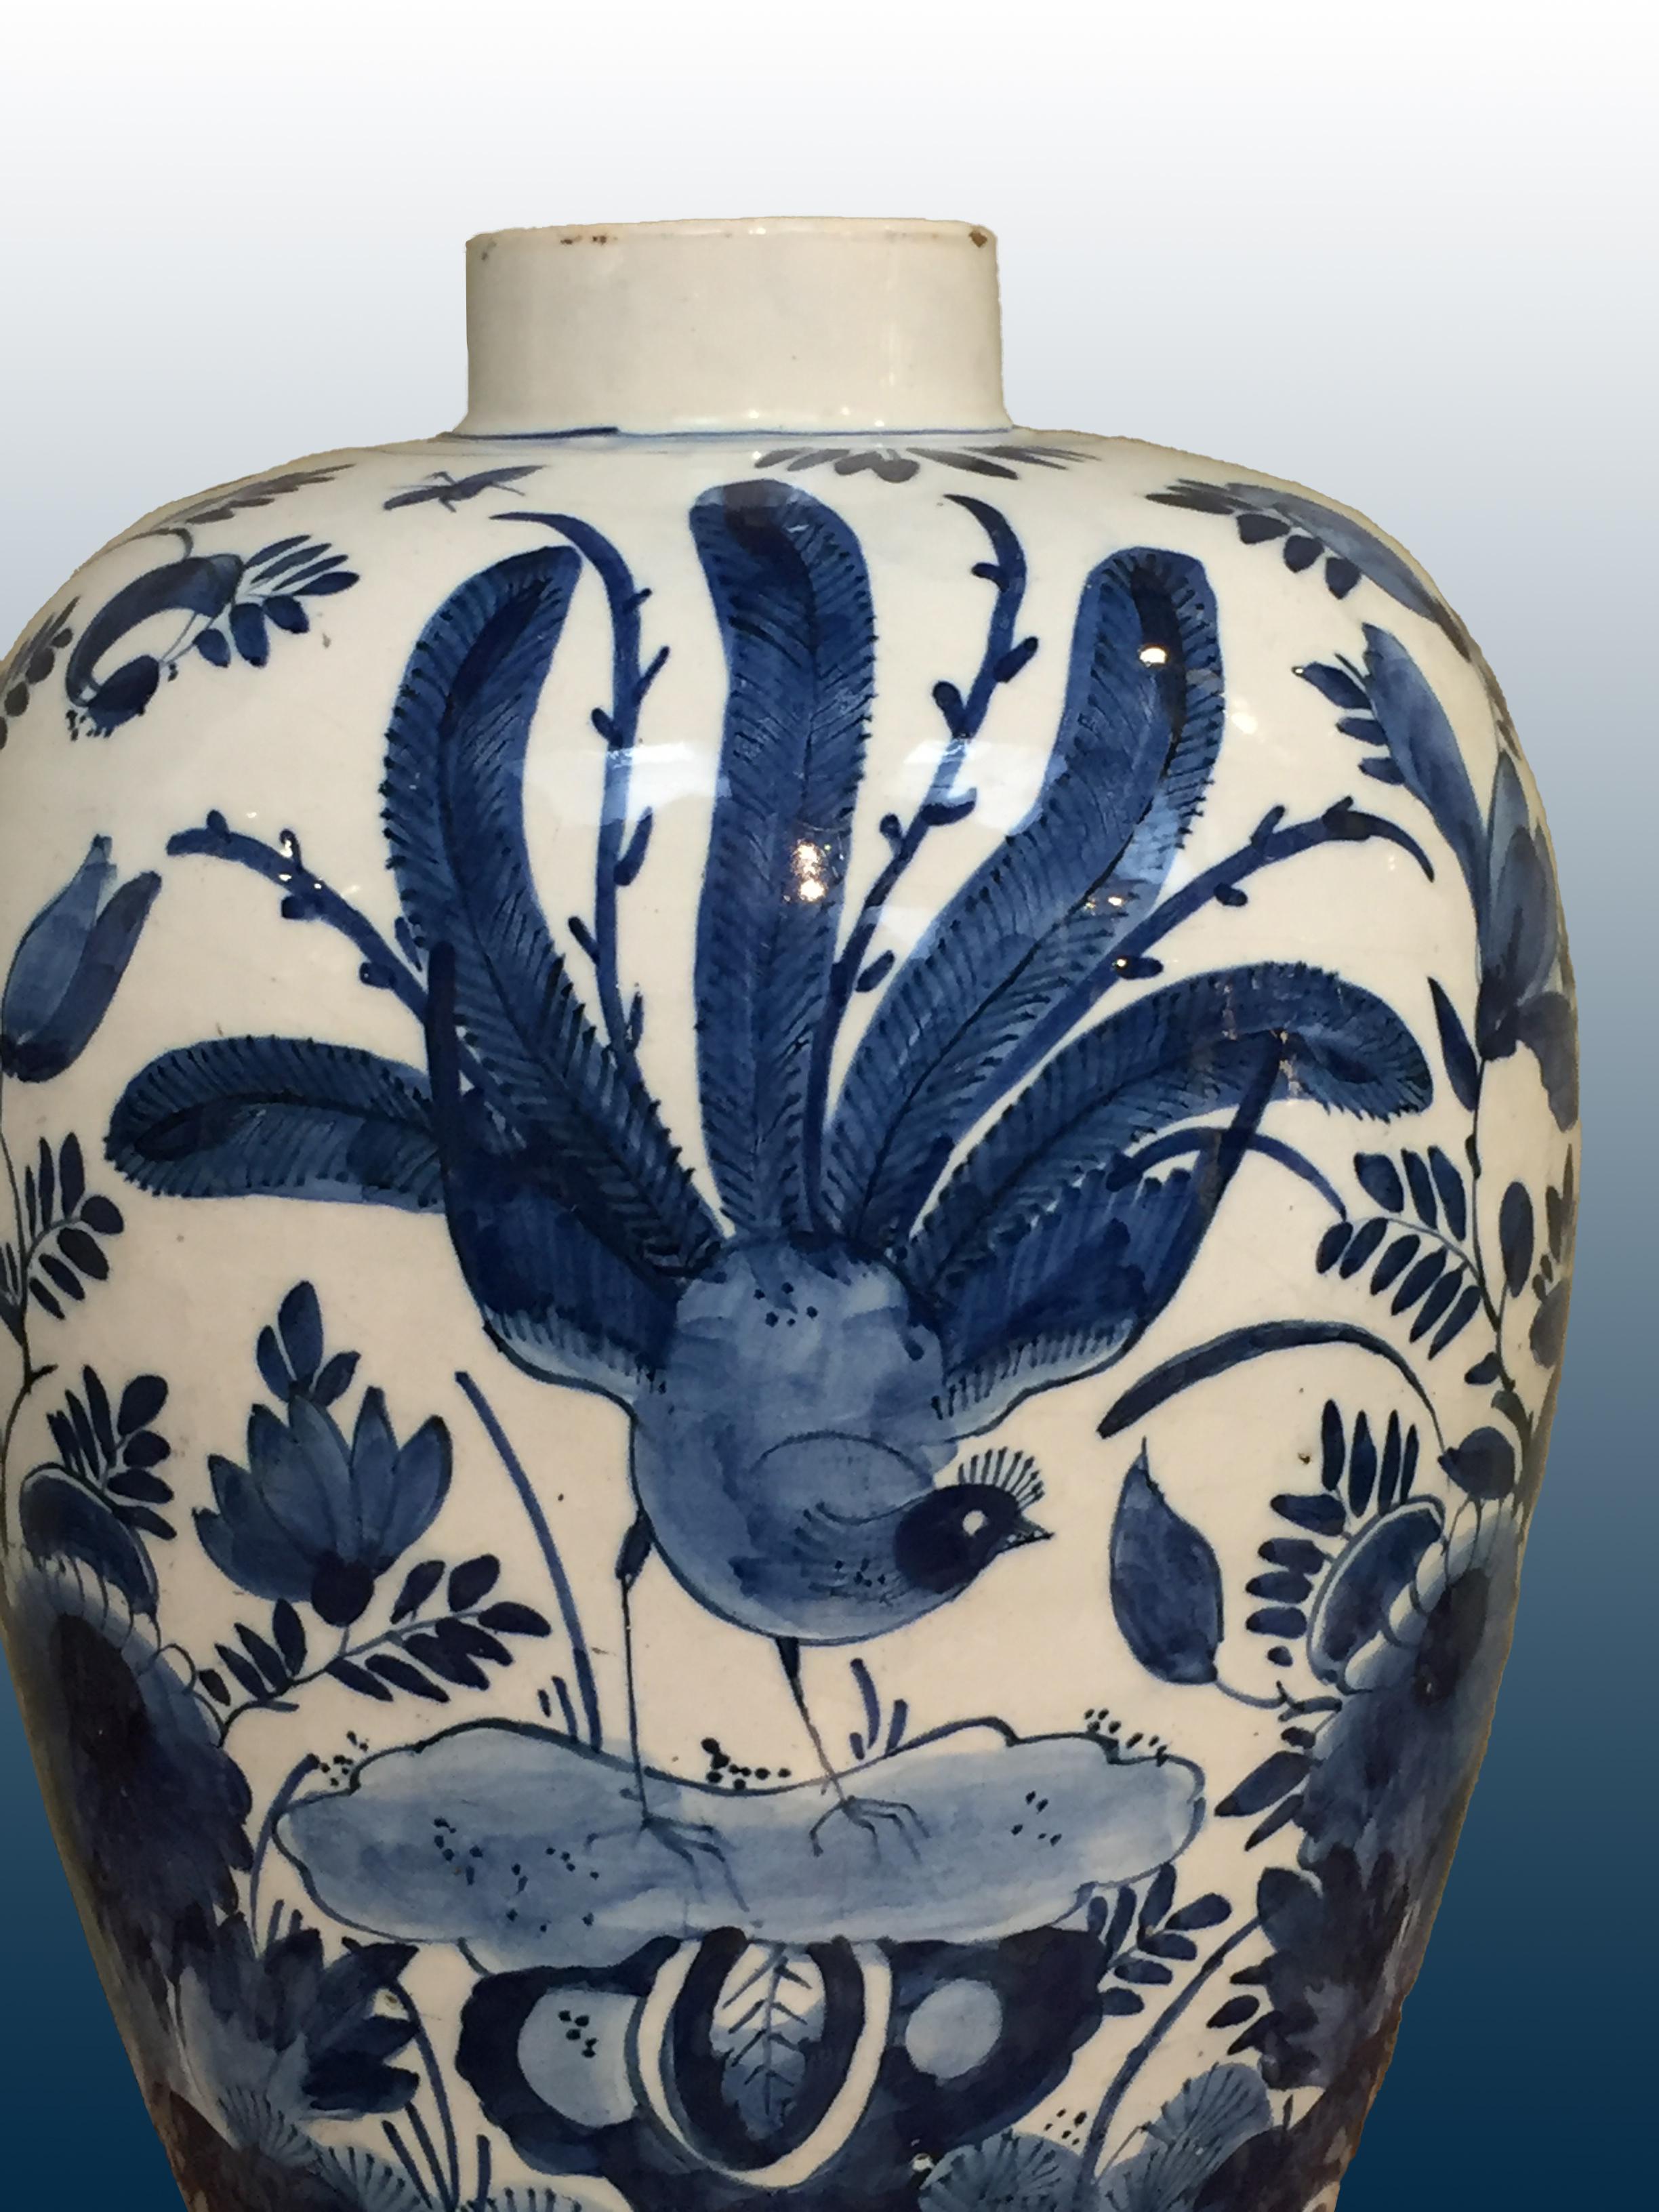 The Netherlands
Delft

First half of the 18th century
Workshop unknown

A blue and white jar with chinoiserie decoration in Kangxi style with a peacock in a garden. At the front, we see the peacock on a rock surrounded by flowers and insects, that